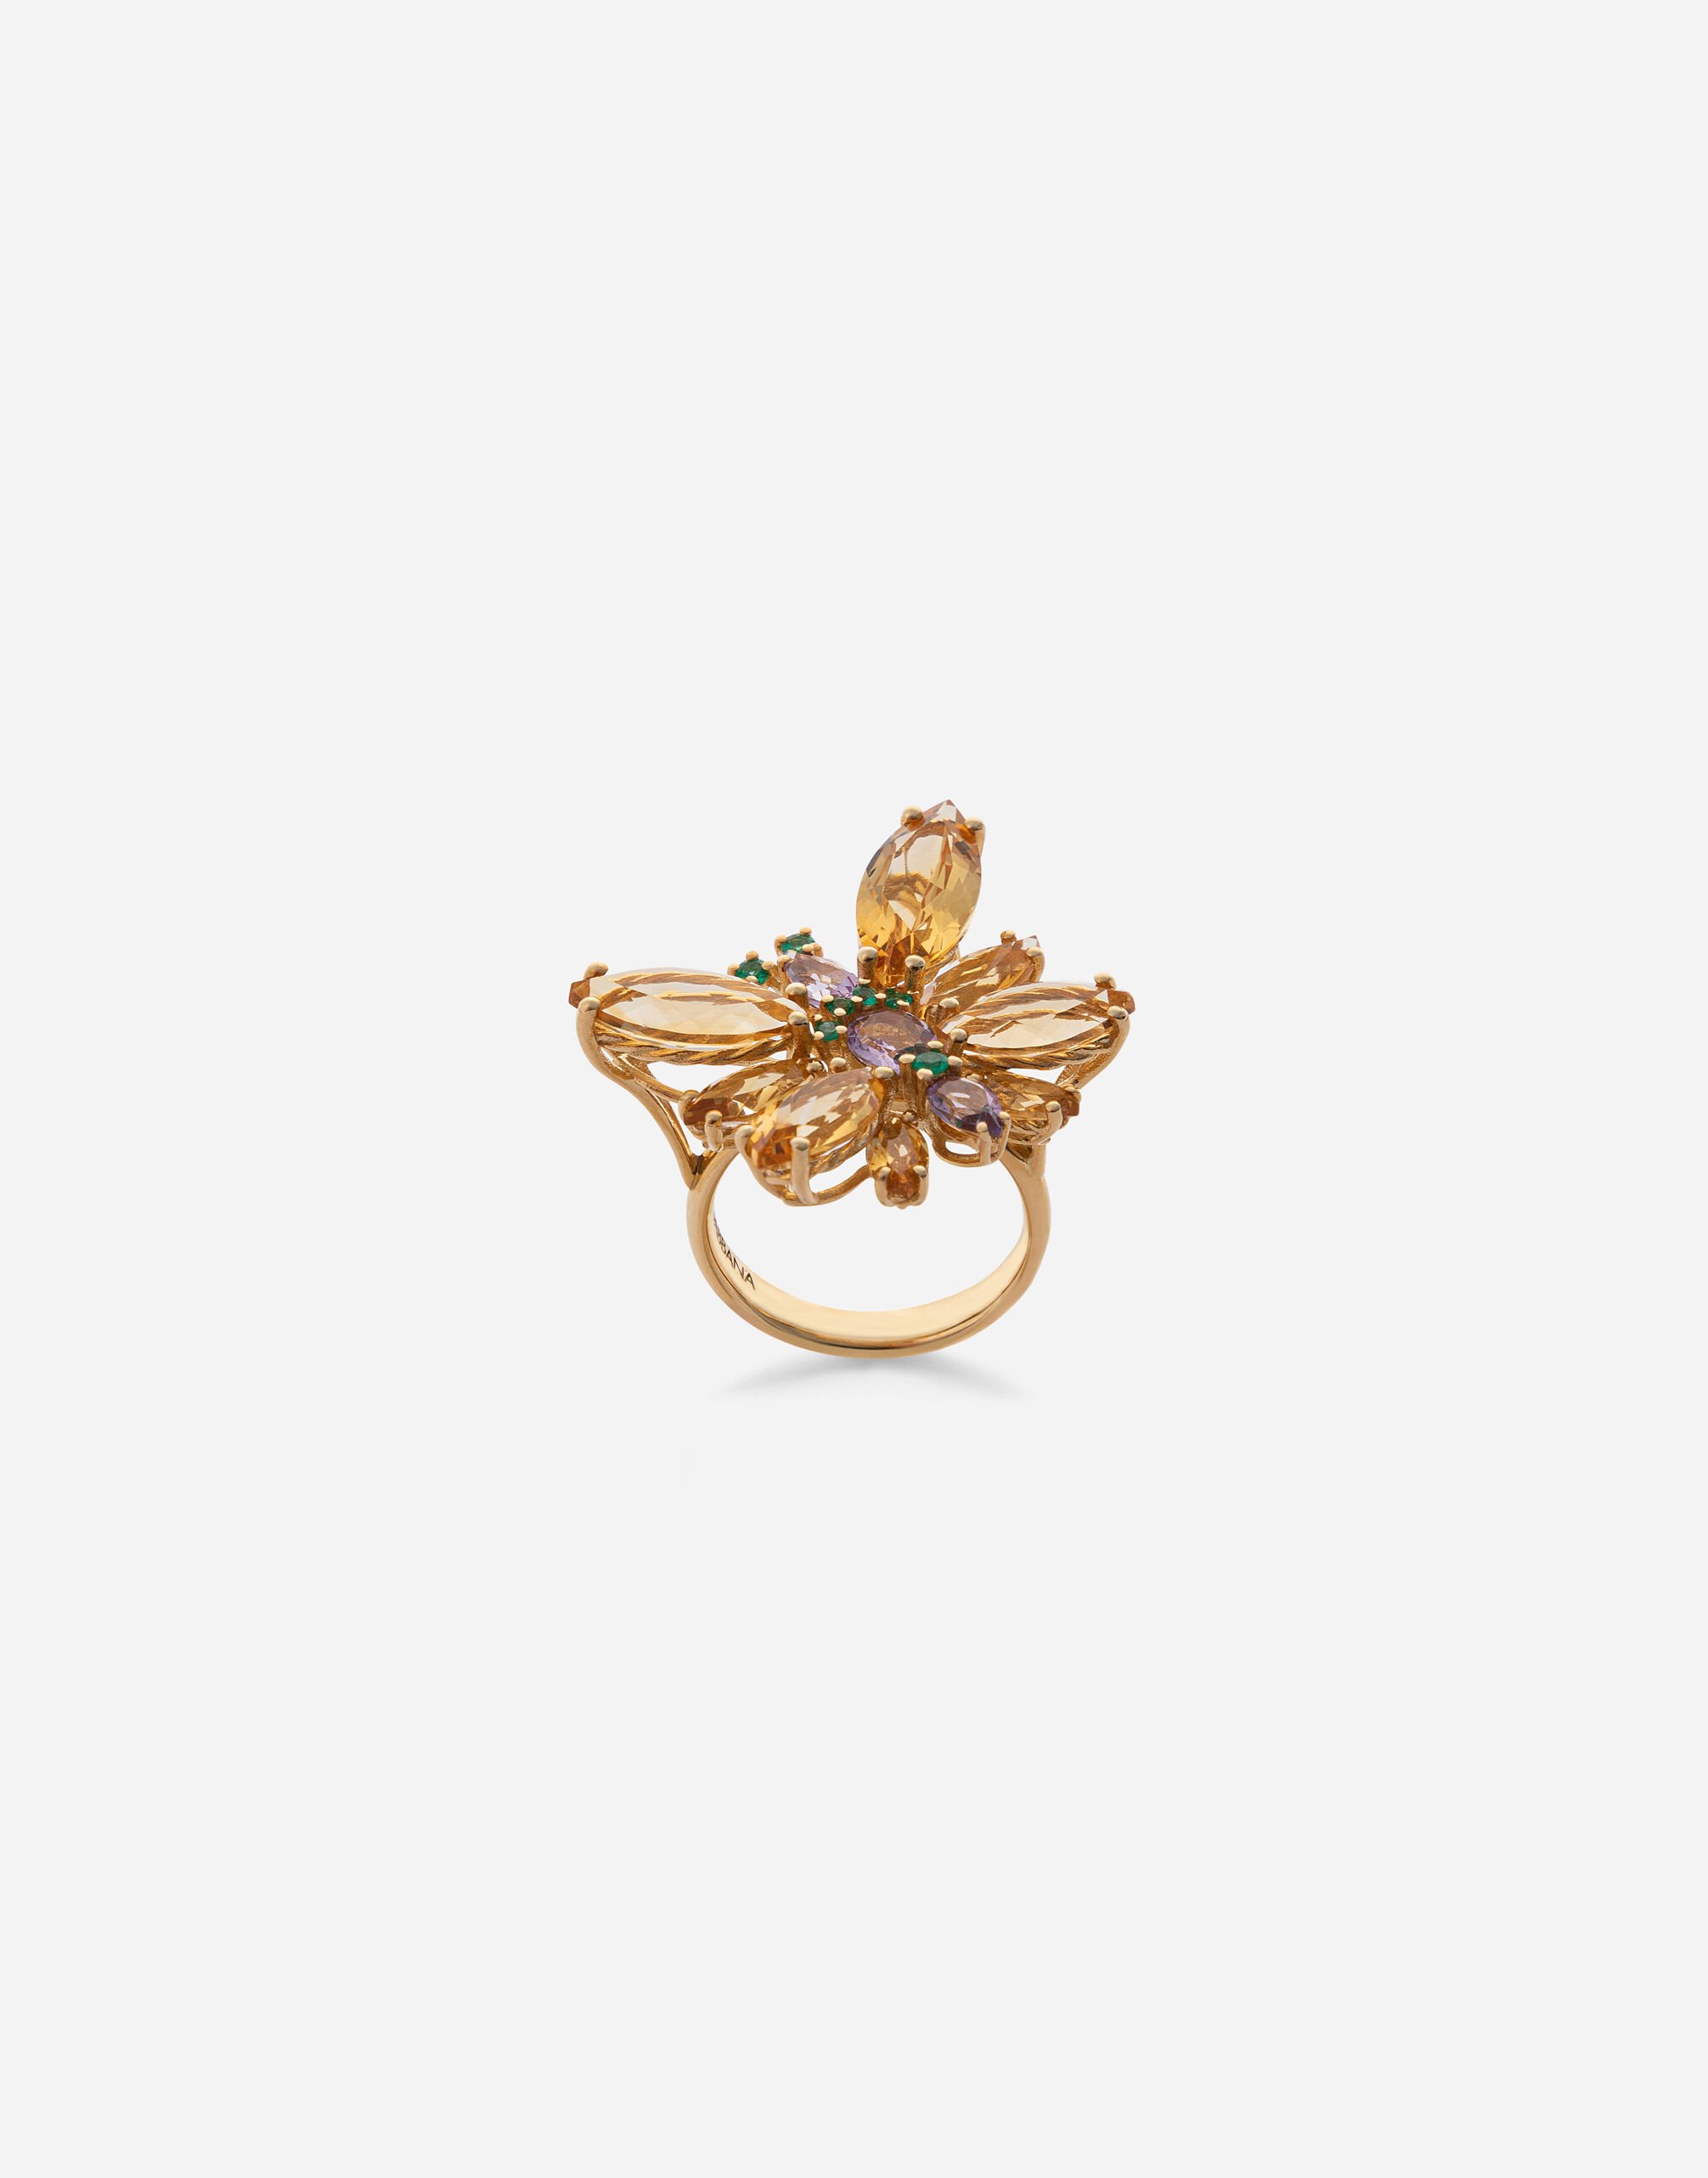 Dolce & Gabbana Spring ring in yellow 18kt gold with citrine butterfly Gold WFHK2GWSAPB